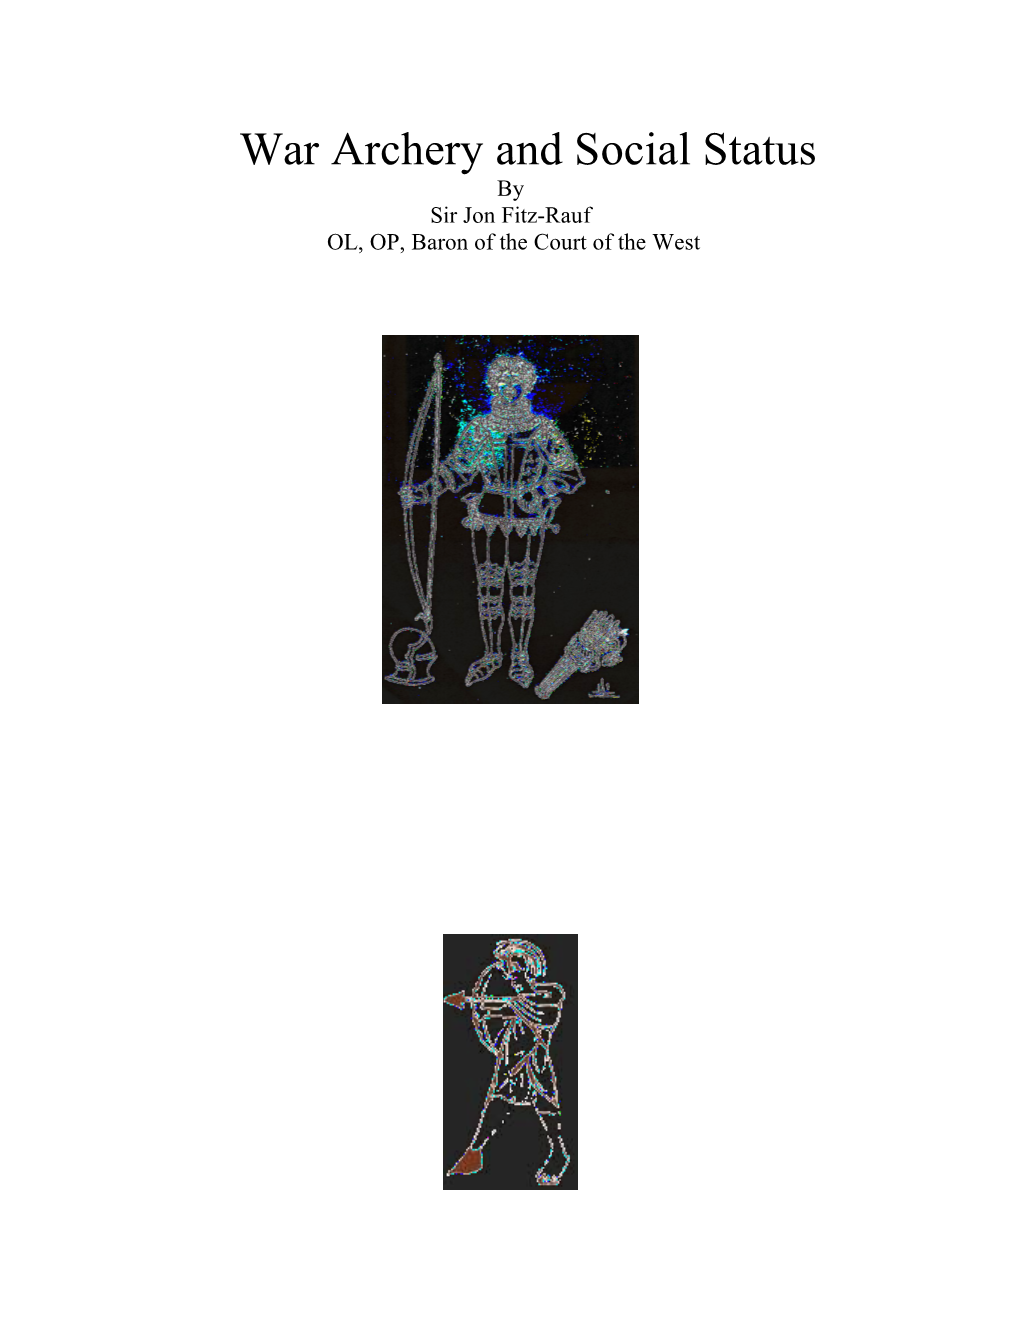 War Archery and Social Status by Sir Jon Fitz-Rauf OL, OP, Baron of the Court of the West